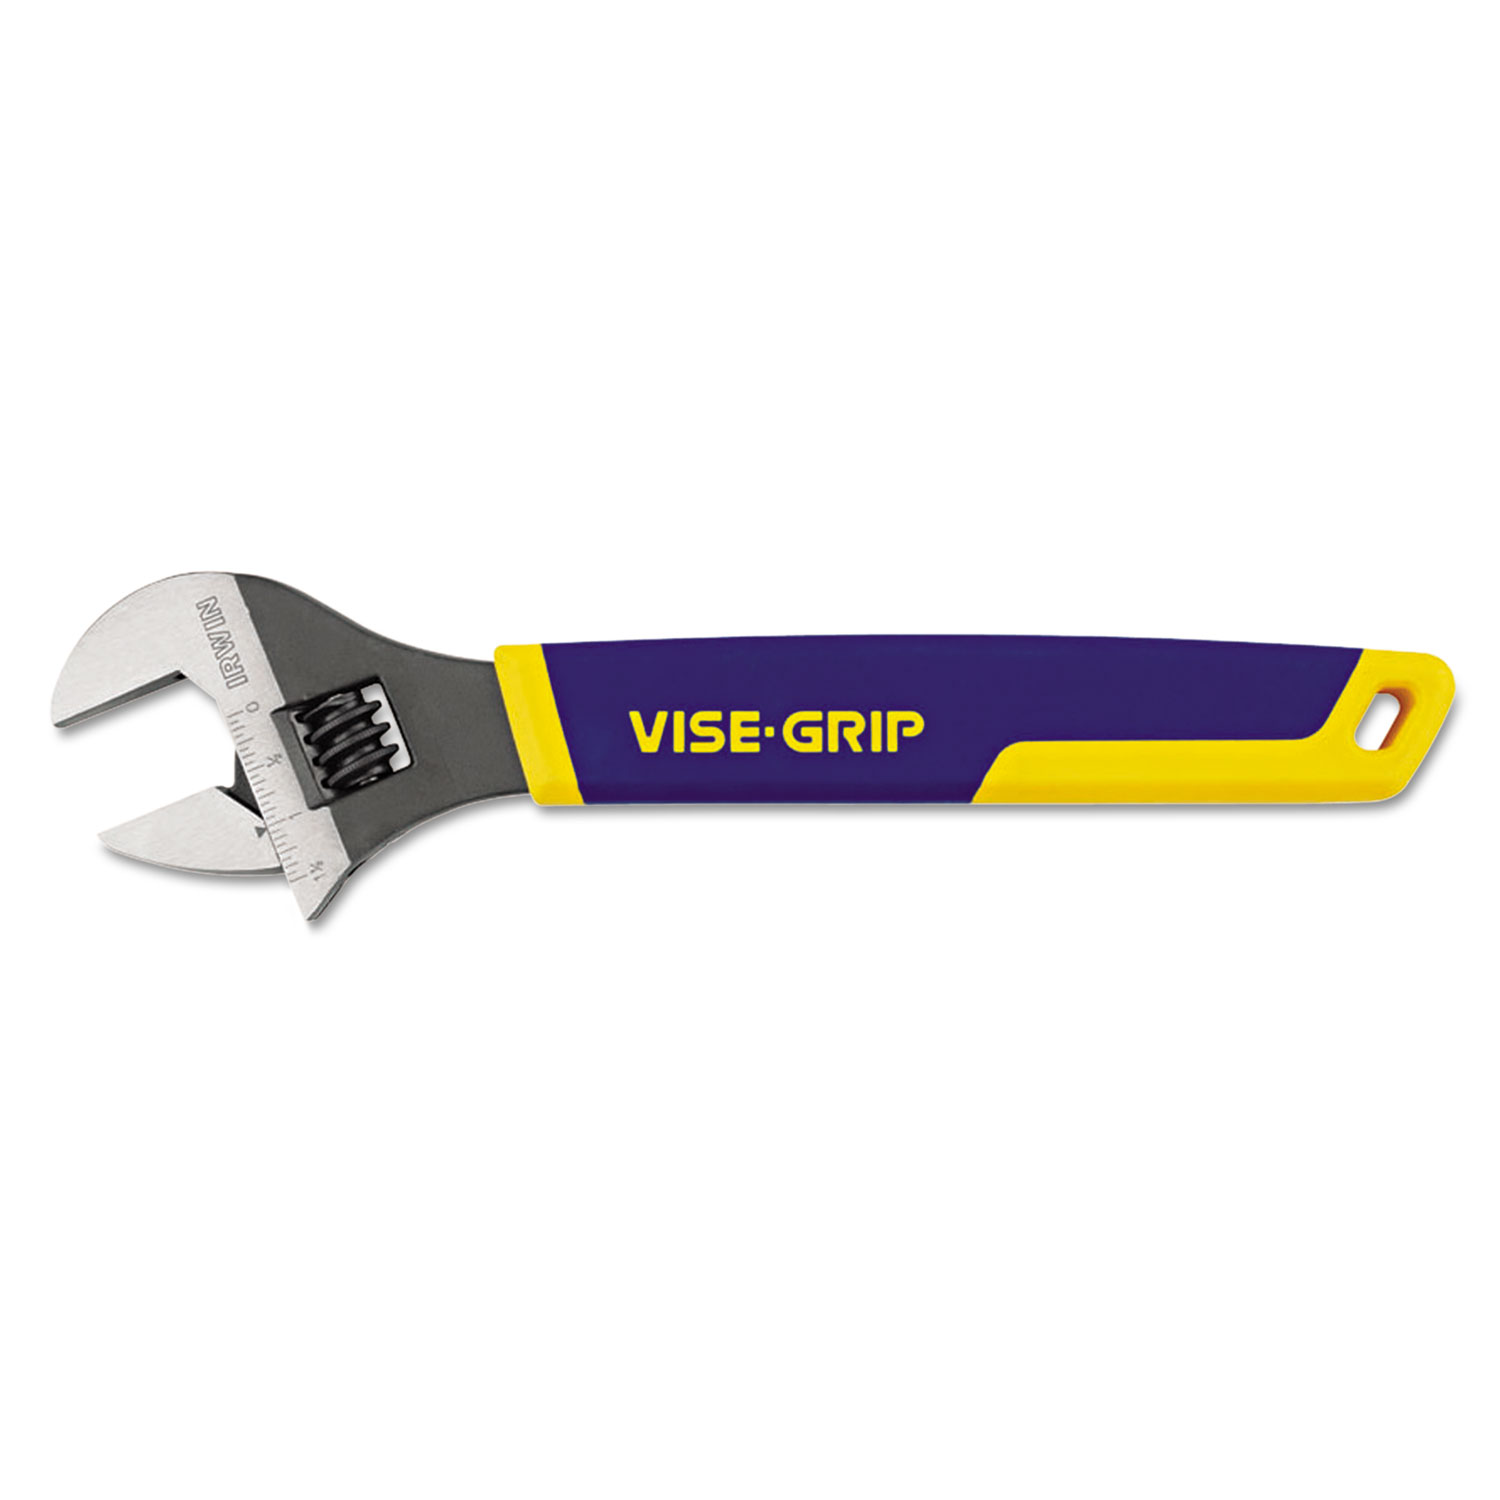 IRWIN VISE-GRIP Adjustable Wrench, 12 Long, 1 1/2 Jaw Capacity